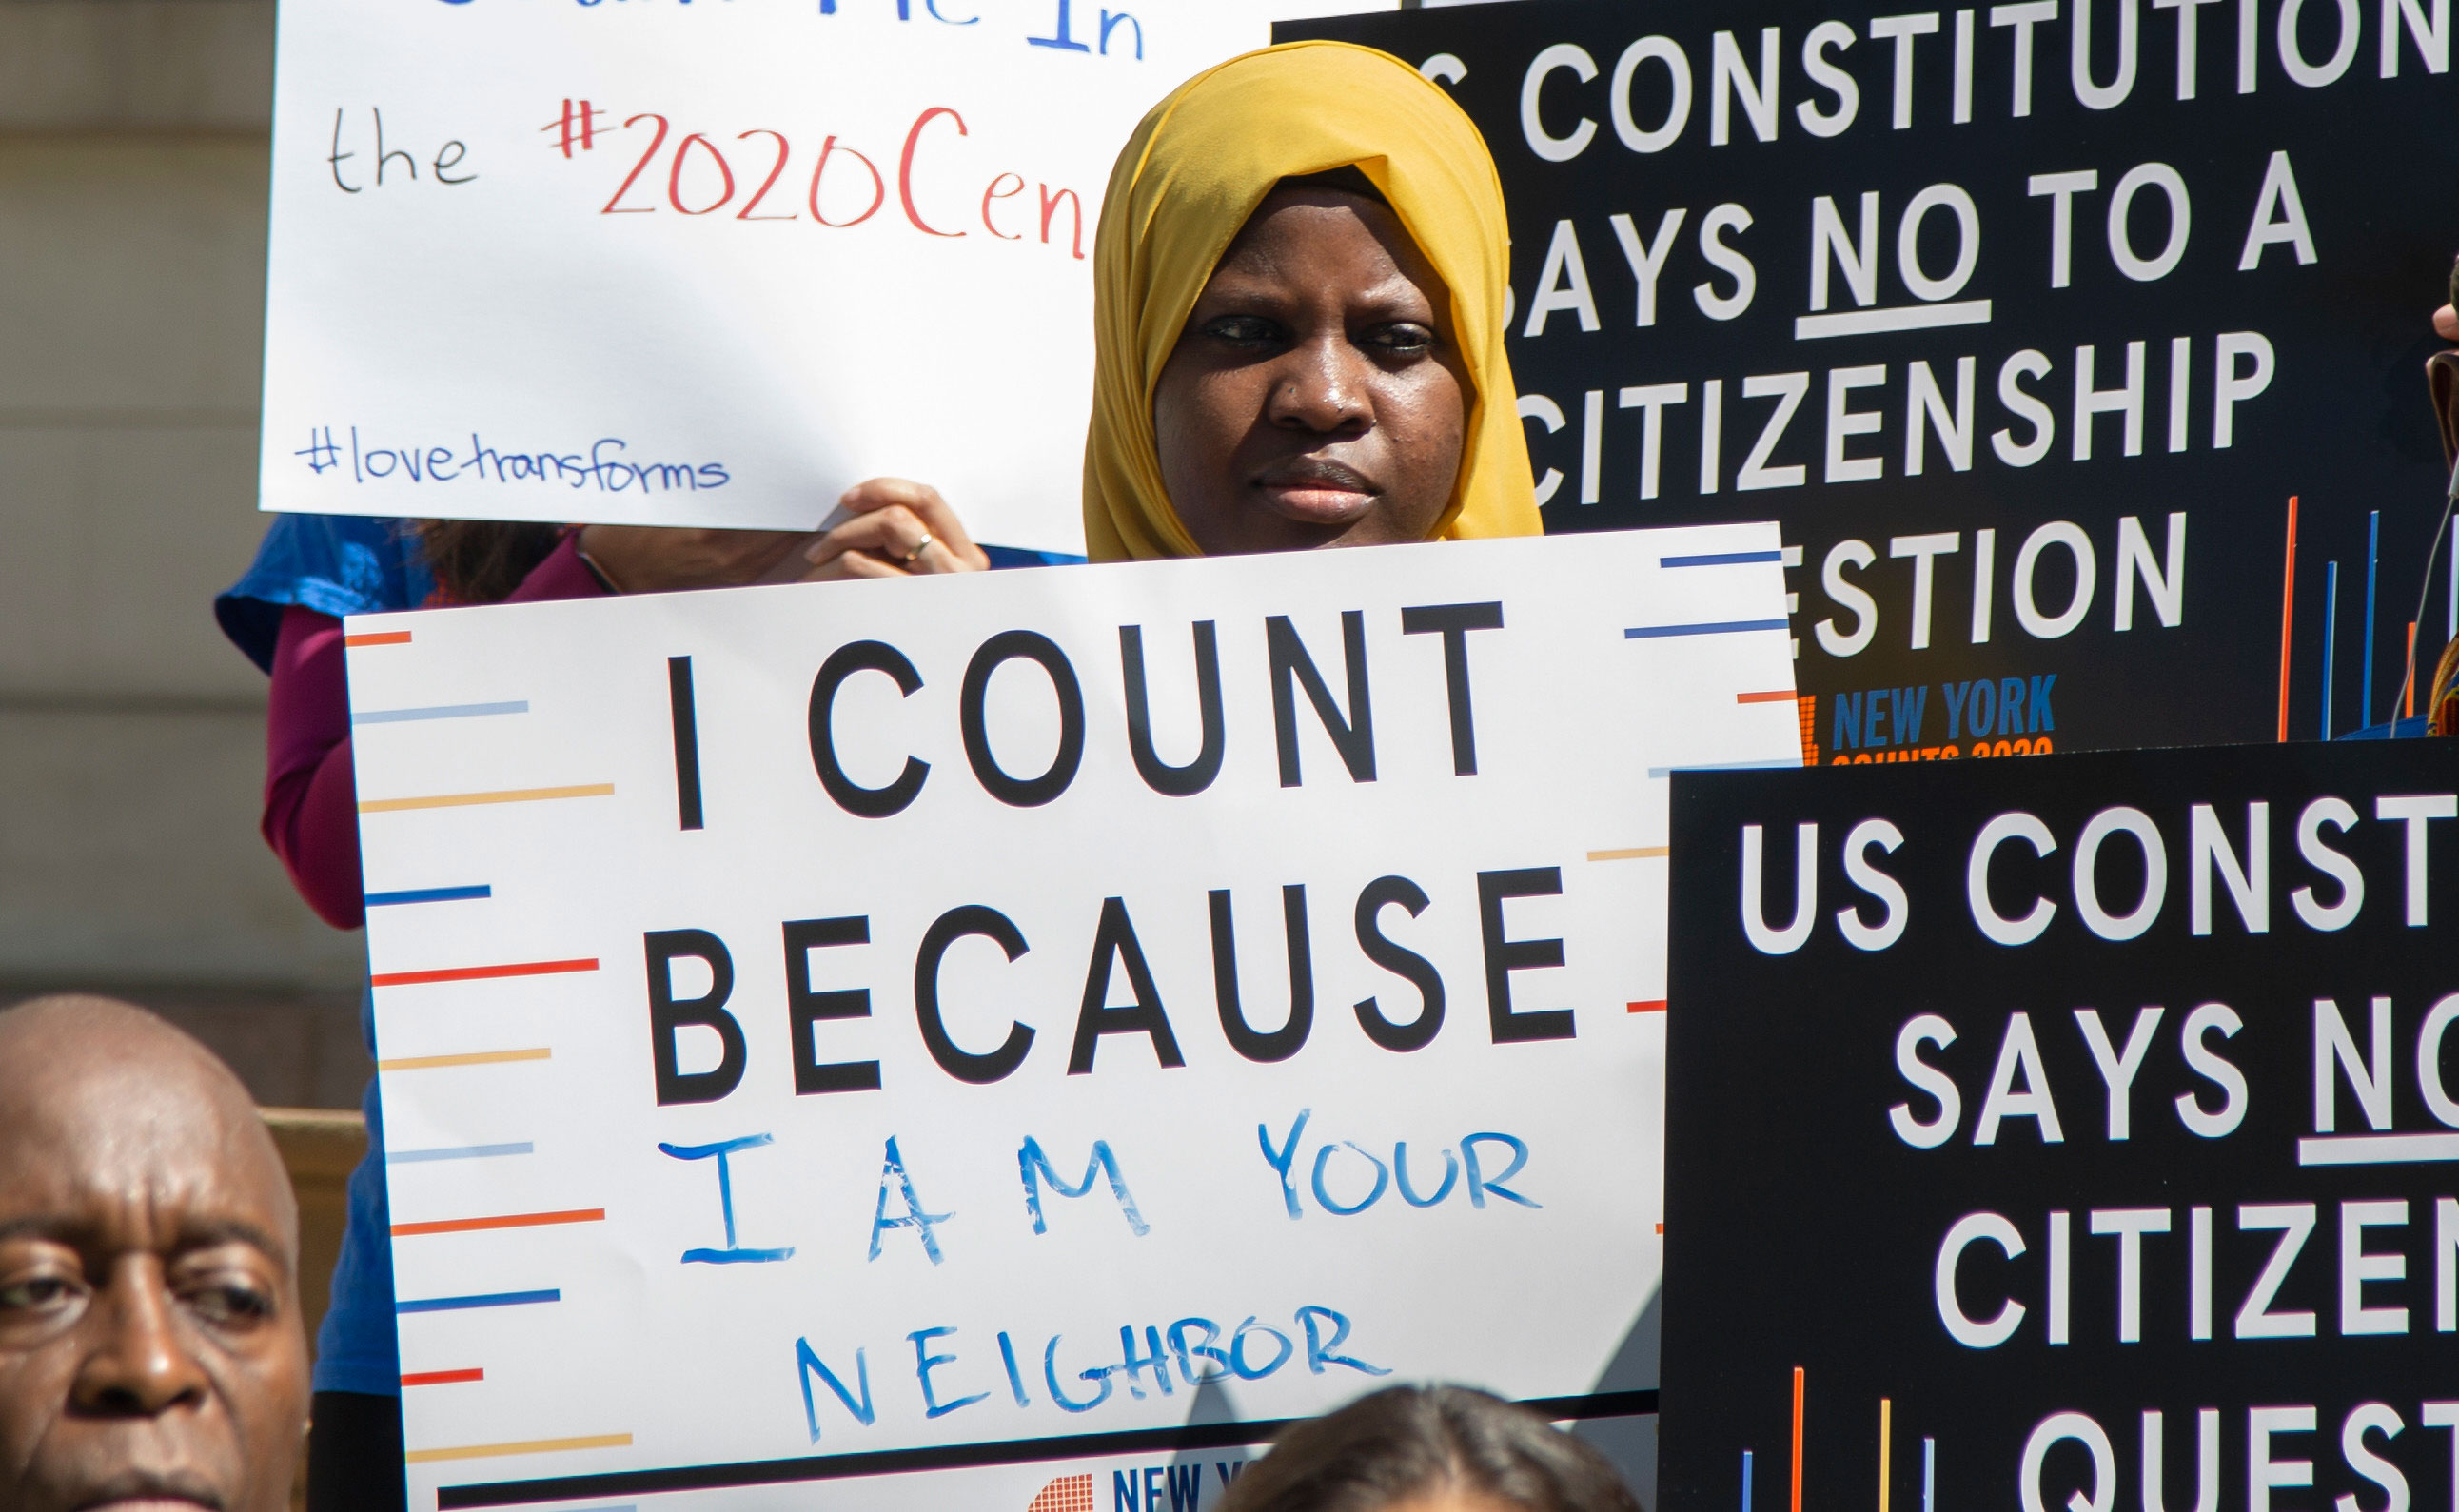 Image shows a young person at a New York City Council press conference holding a sign reading “I Count Because I Am Your Neighbor.”